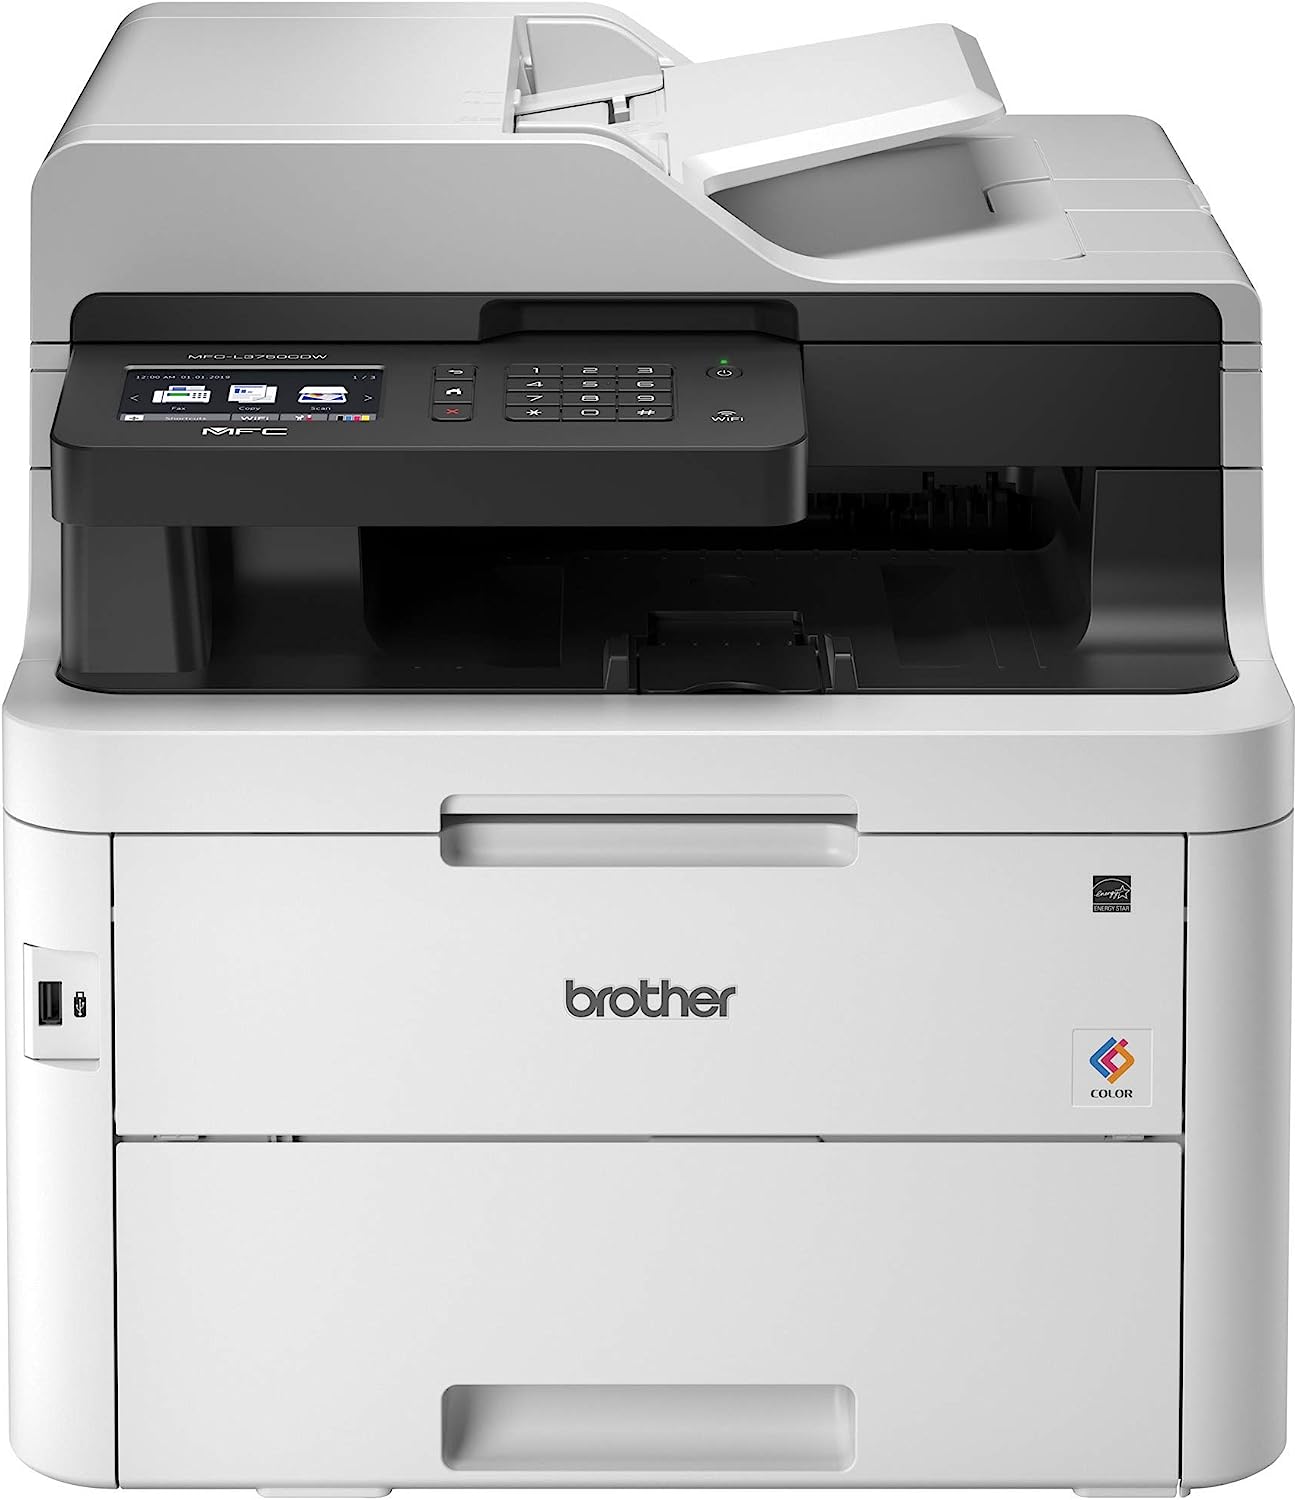 Brother MFC-L3750CDW Digital Color All-in-One Printer, [...]